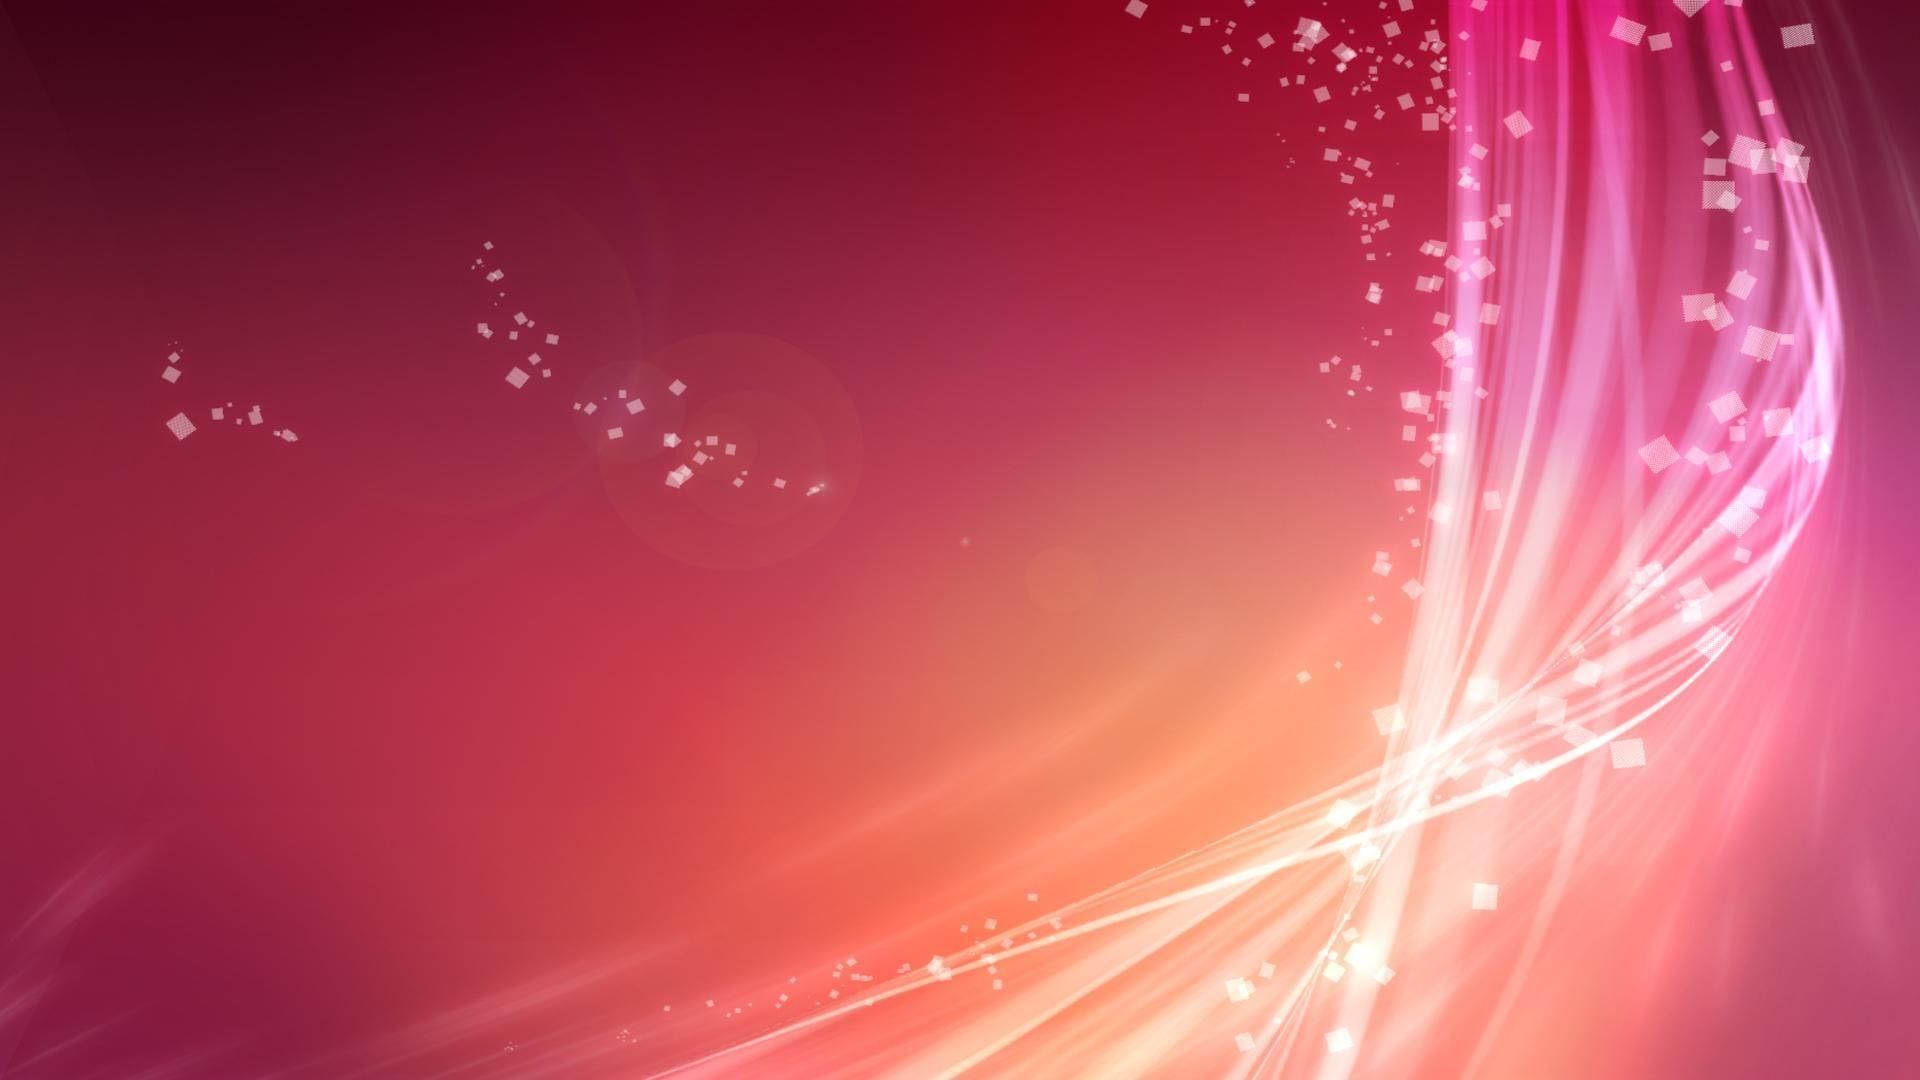 Light reddish and pinkish abstract fire free desktop background